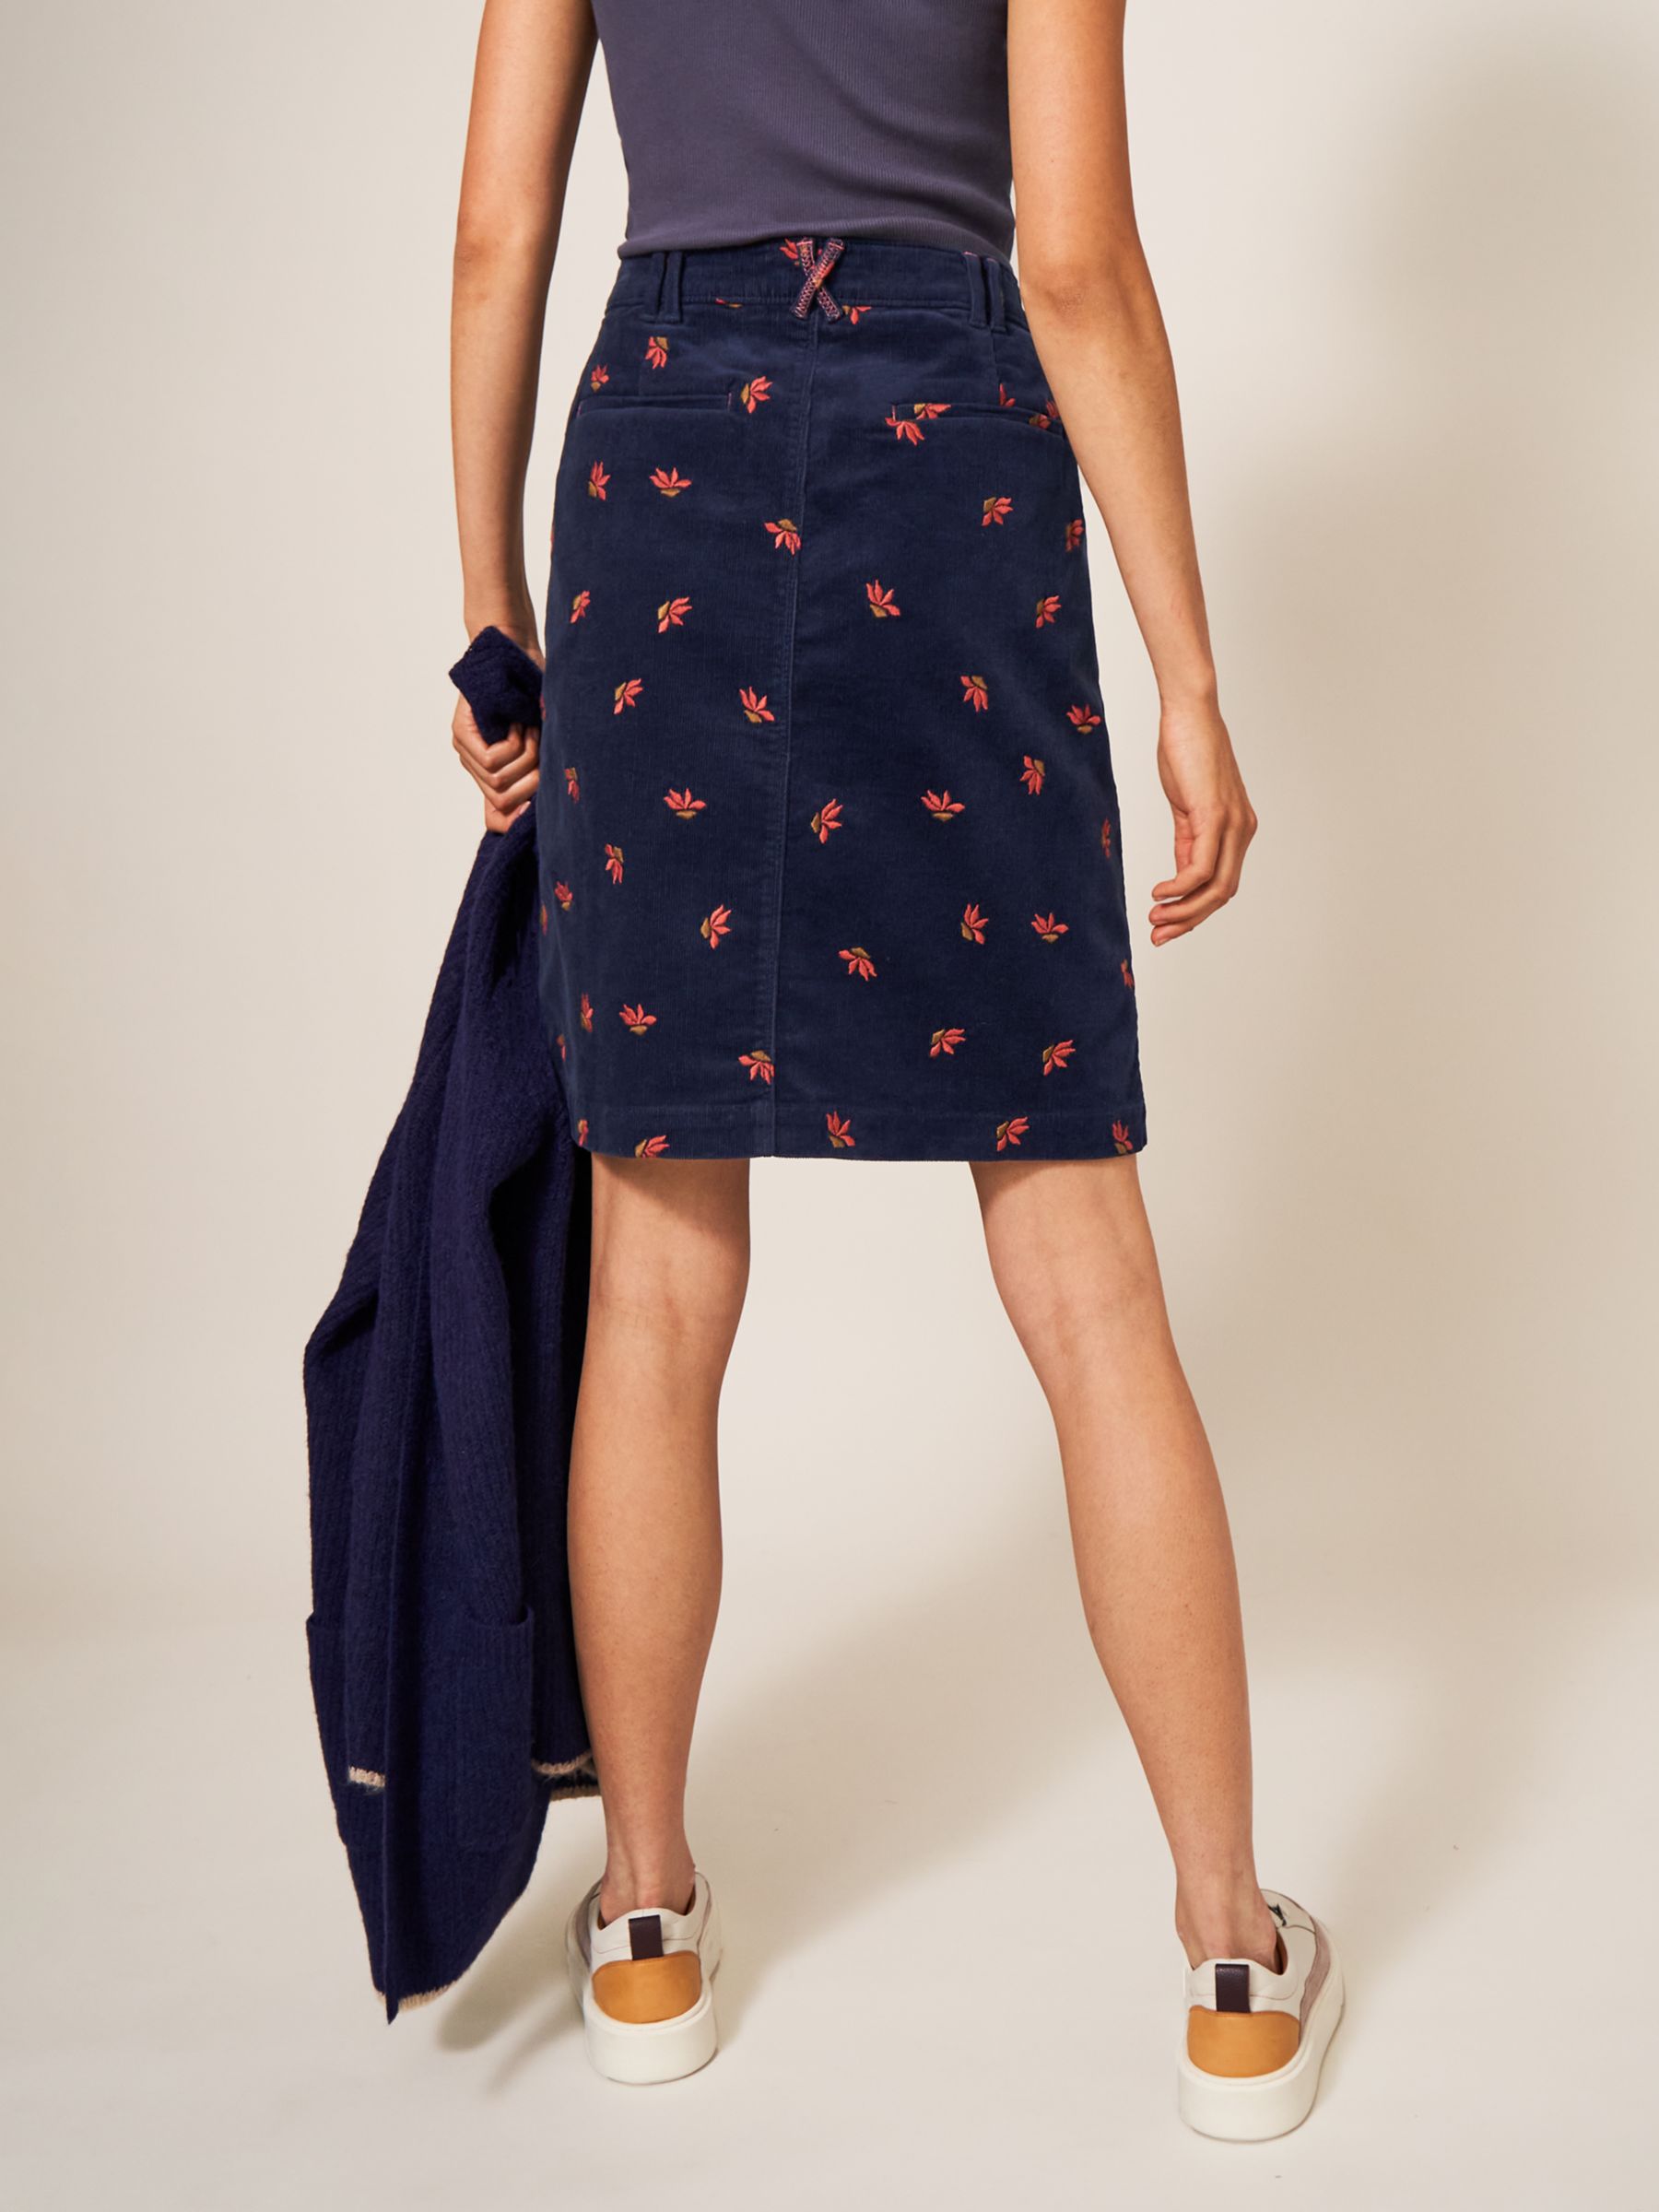 Buy White Stuff Melody Embroidered Corduroy Skirt, Navy Multi Online at johnlewis.com